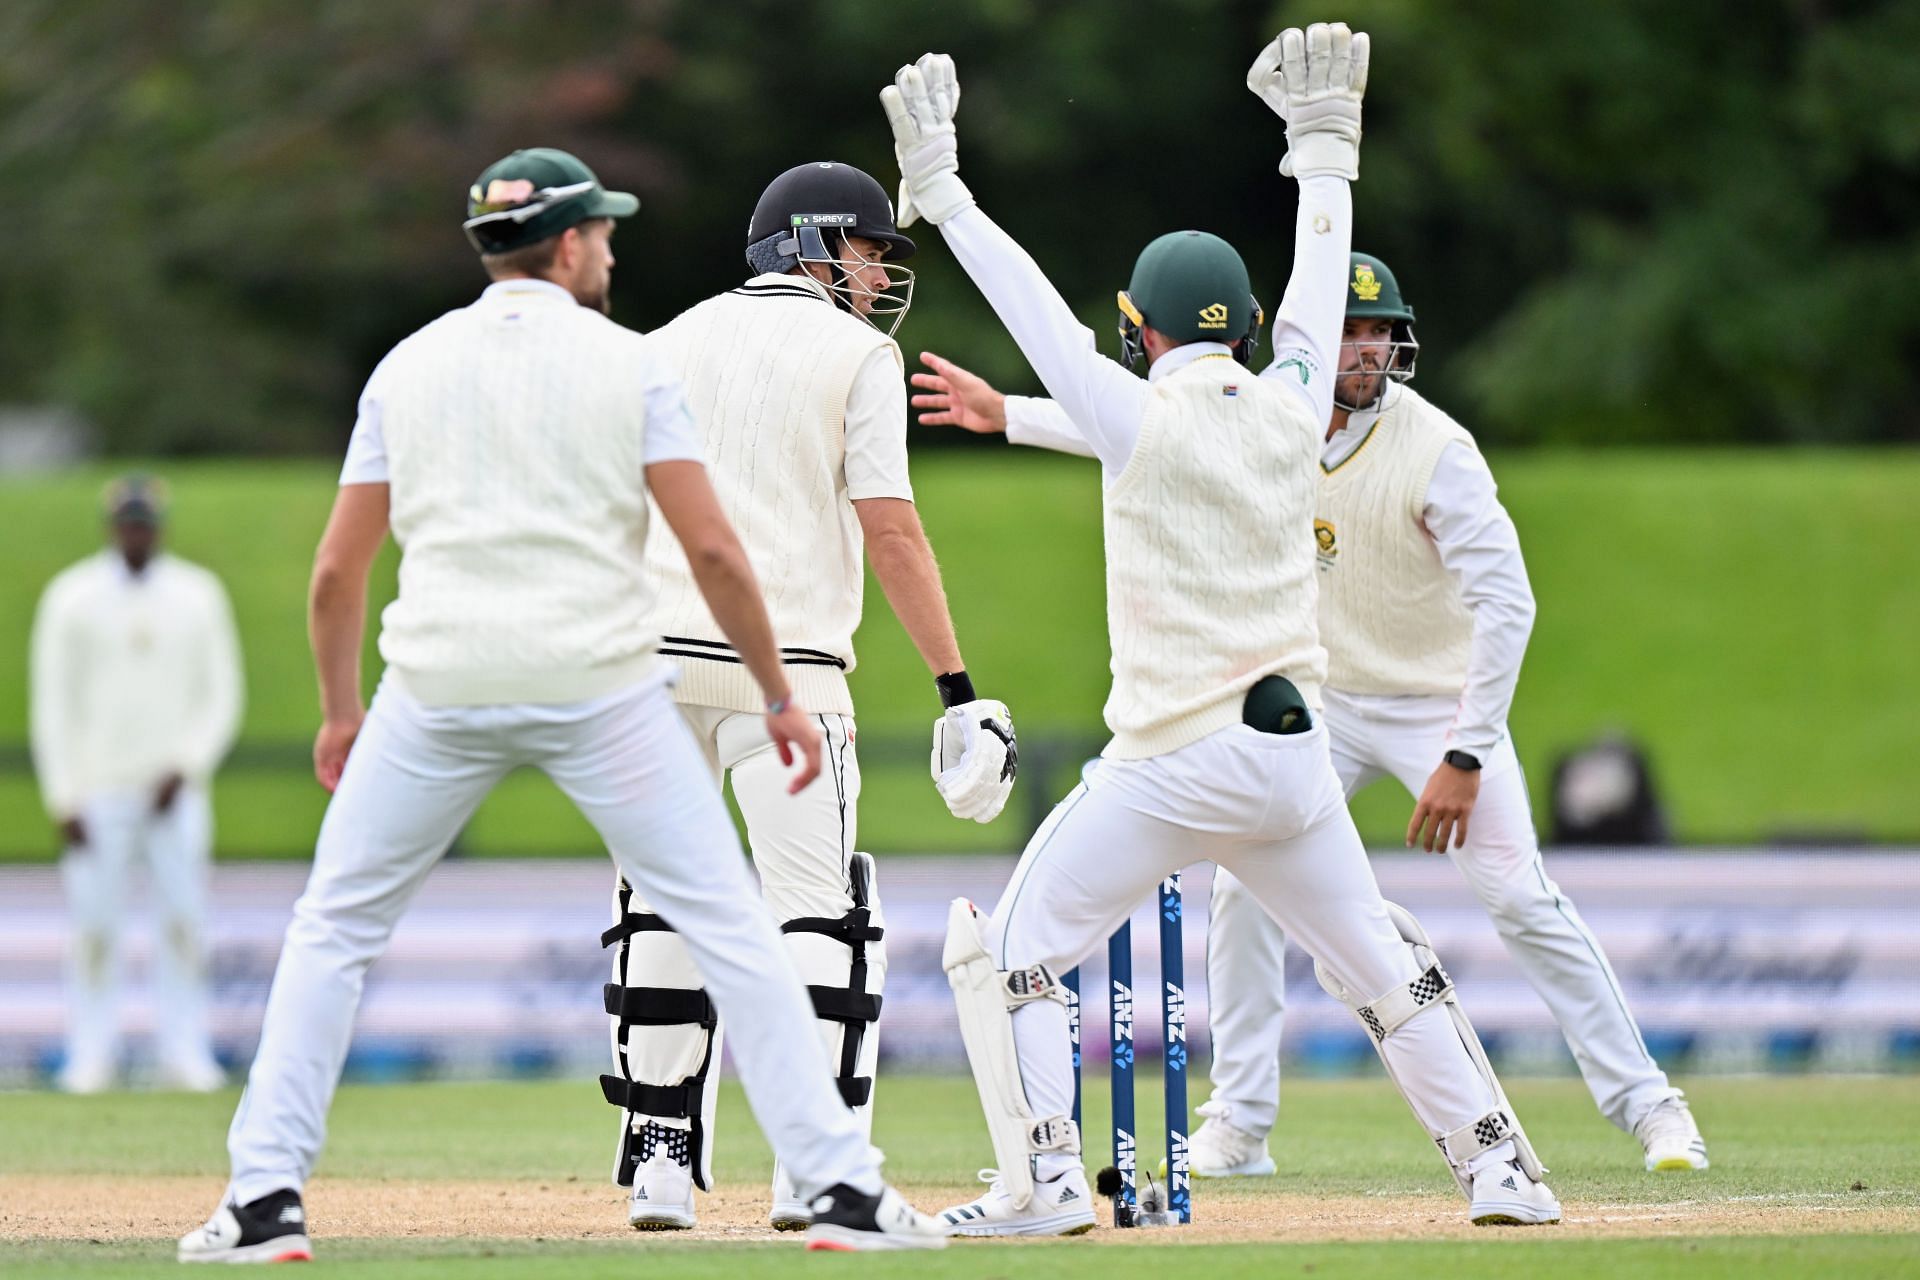 New Zealand v South Africa - 2nd Test: Day 5